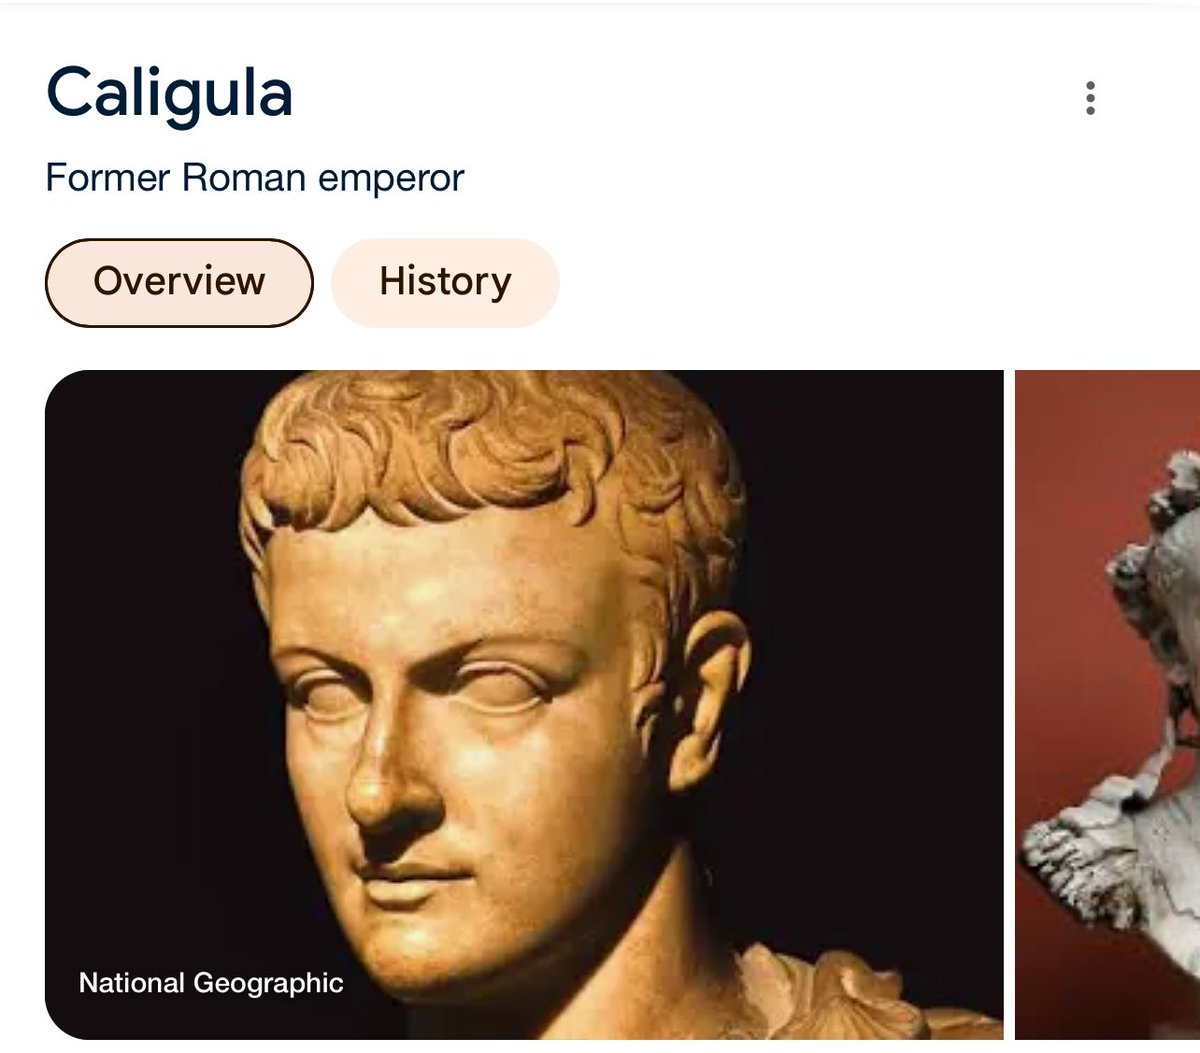 I like that Google specifies that Caligula is a “former Roman emperor” so that you don’t think by mistake that he’s currently the emperor of the Roman Empire.